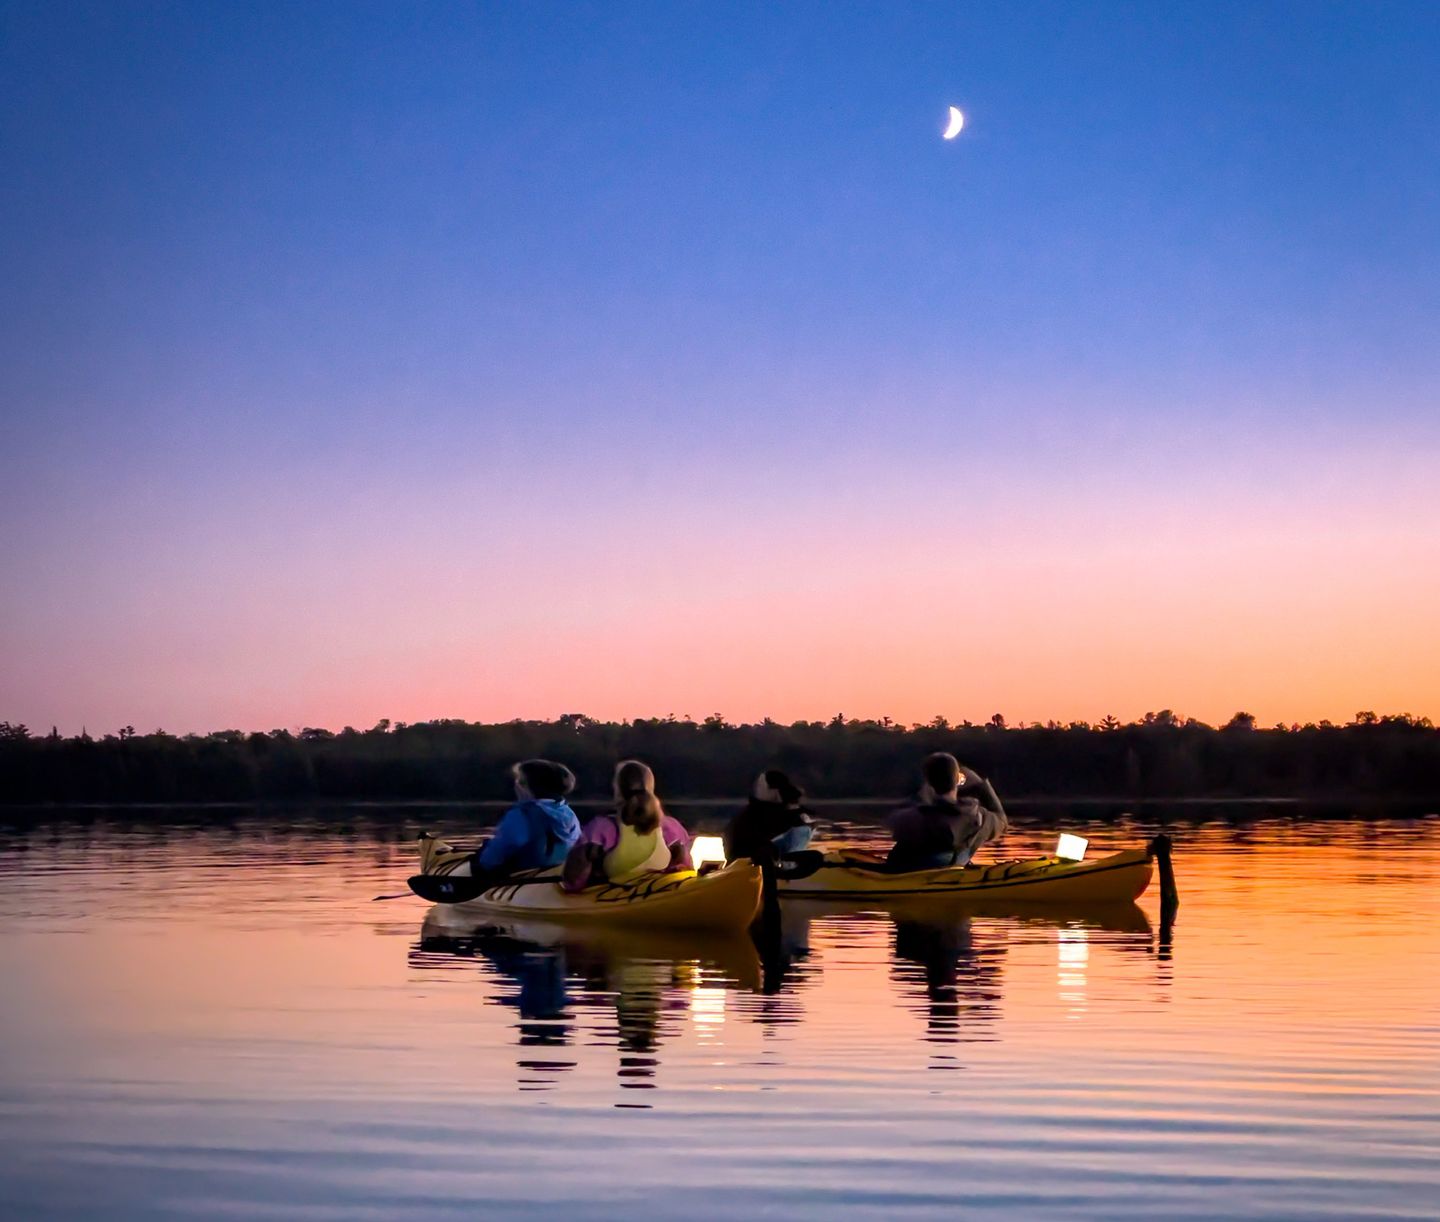 Two tandem kayaks with illuminated solar lanterns sit on calm waters at dusk in Lake Huron's Les Cheneaux islands while on a sunset kayak tour with Woods & Waters. A crescent moon is visible in the sky above them.